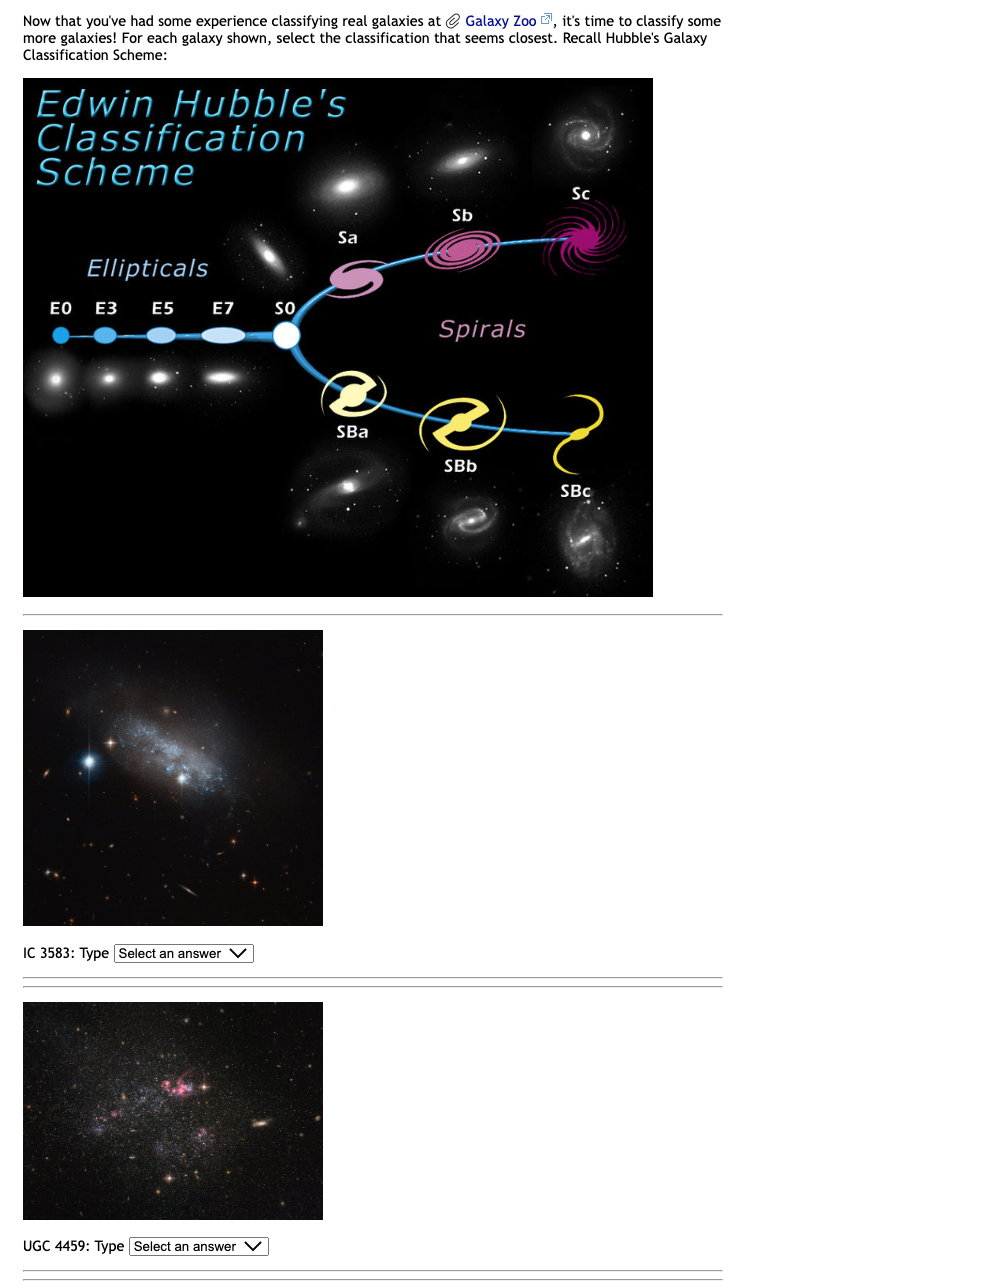 Sample Question from one of the author’s assessments. Galaxy images are randomized and pulled from a Creative Commons licensed archive.